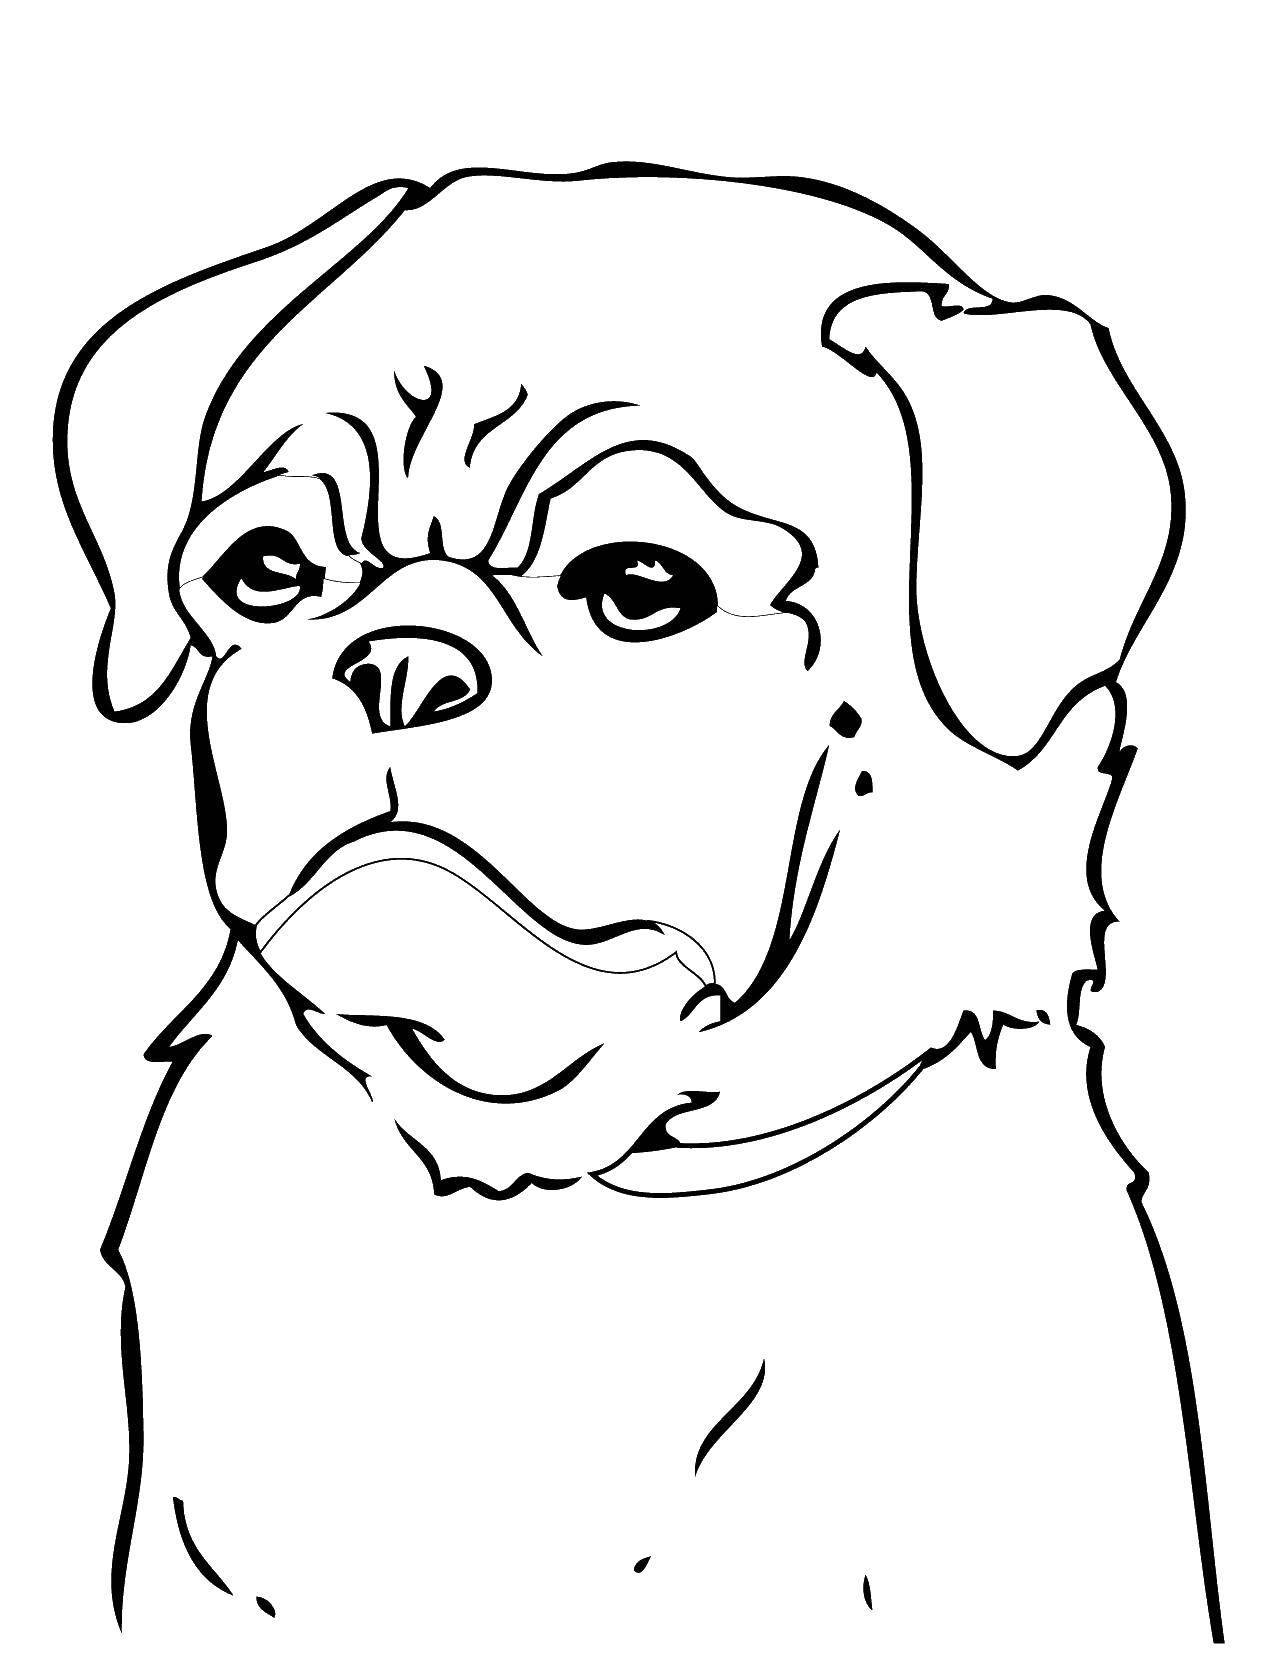 Coloring Dog. Category dogs. Tags:  dogs, dog, dog.